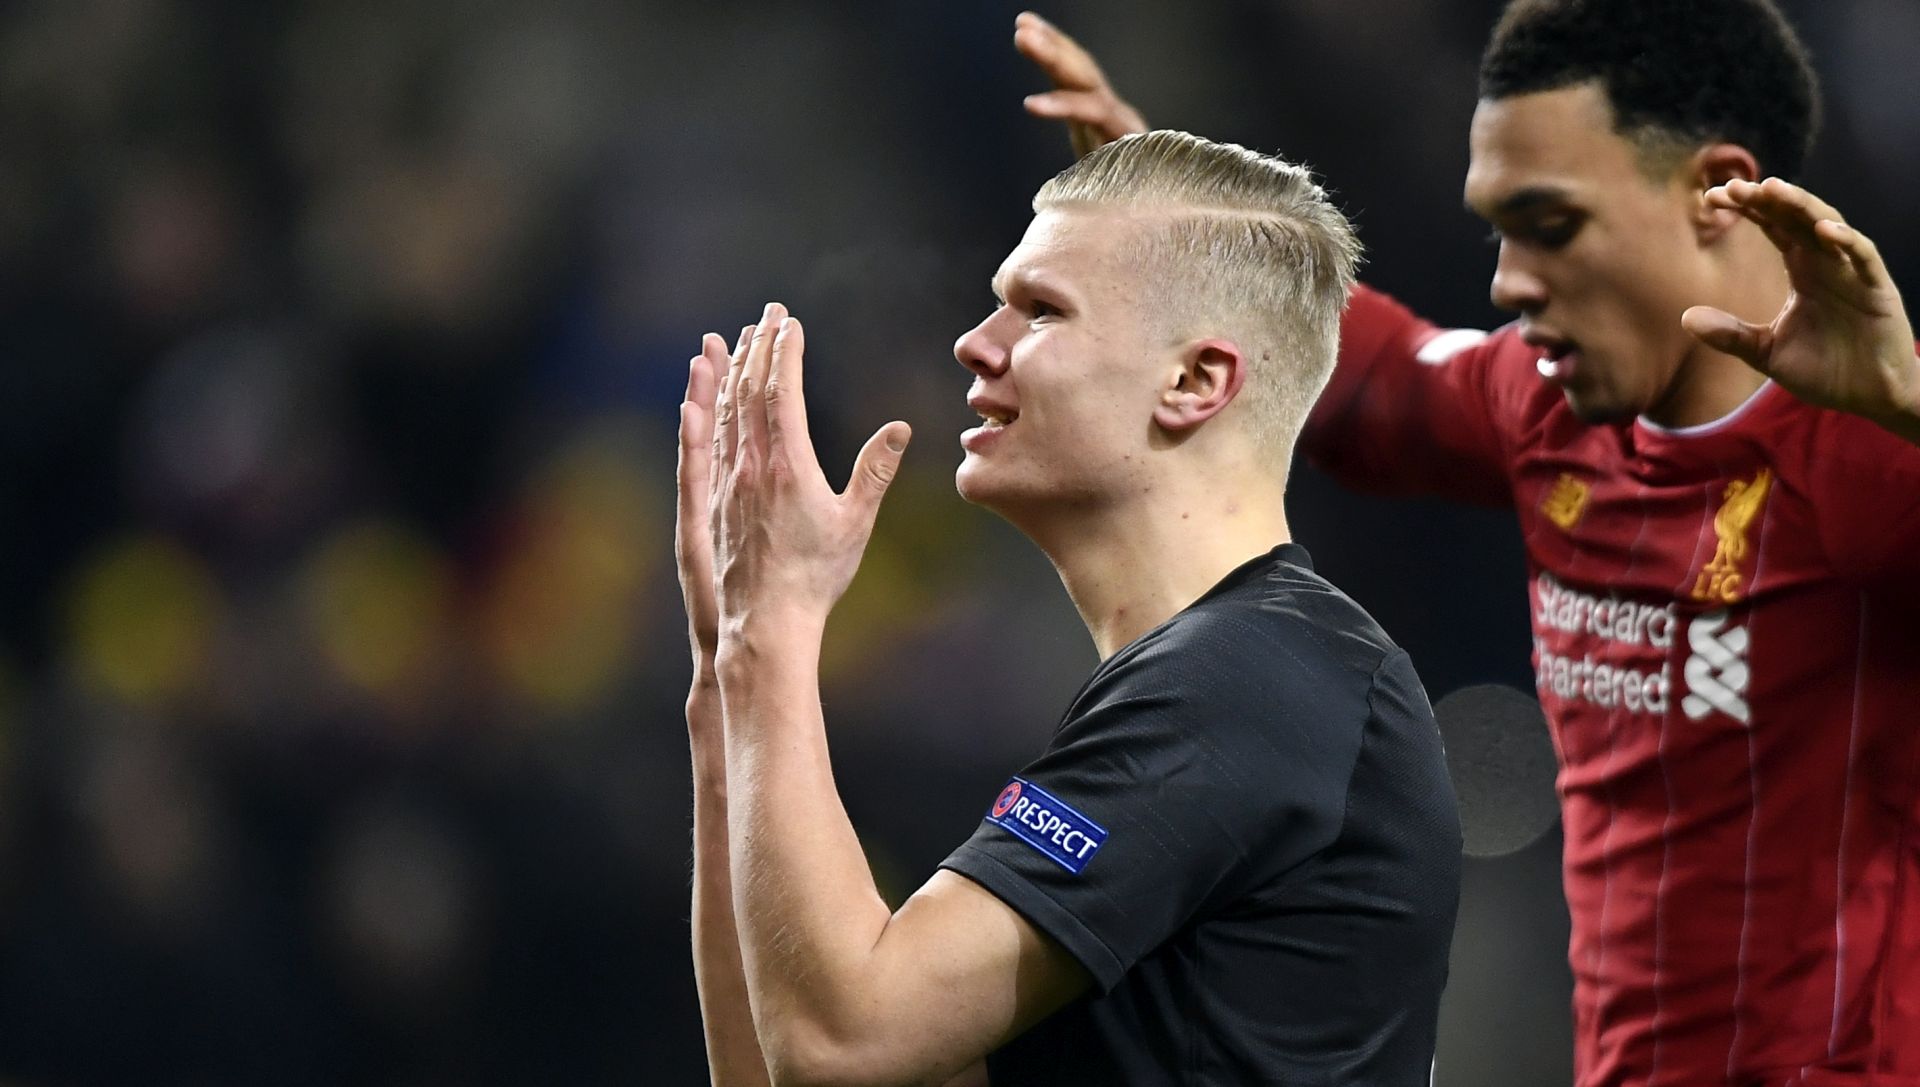 epa08060671 Erling Haaland of FC Salzburg (L) and Trent Alexander-Arnold of Liverpool FC (R) react during the UEFA Champions League group E soccer match between FC Salzburg and Liverpool FC in Salzburg, Austria, 10 December 2019.  EPA/LUKAS BARTH